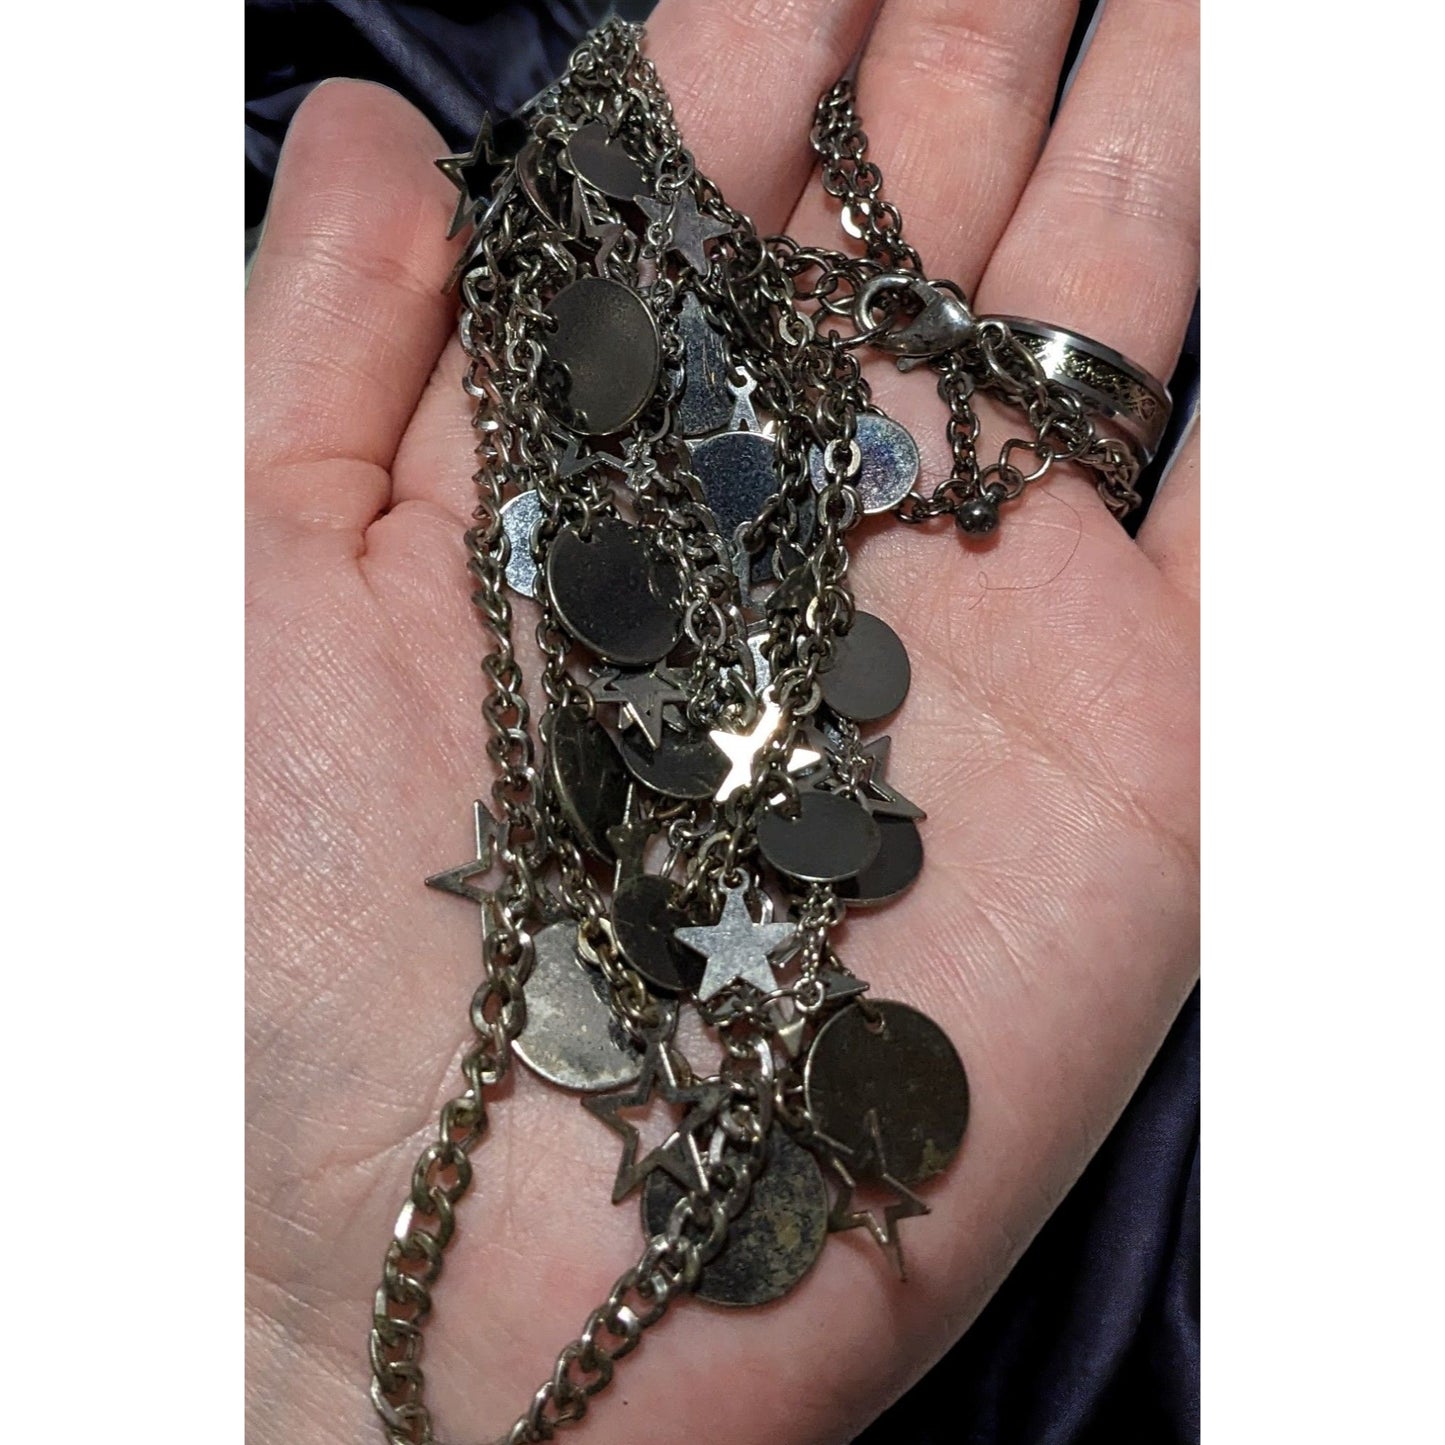 Star Charm Multilayer Chain Necklace